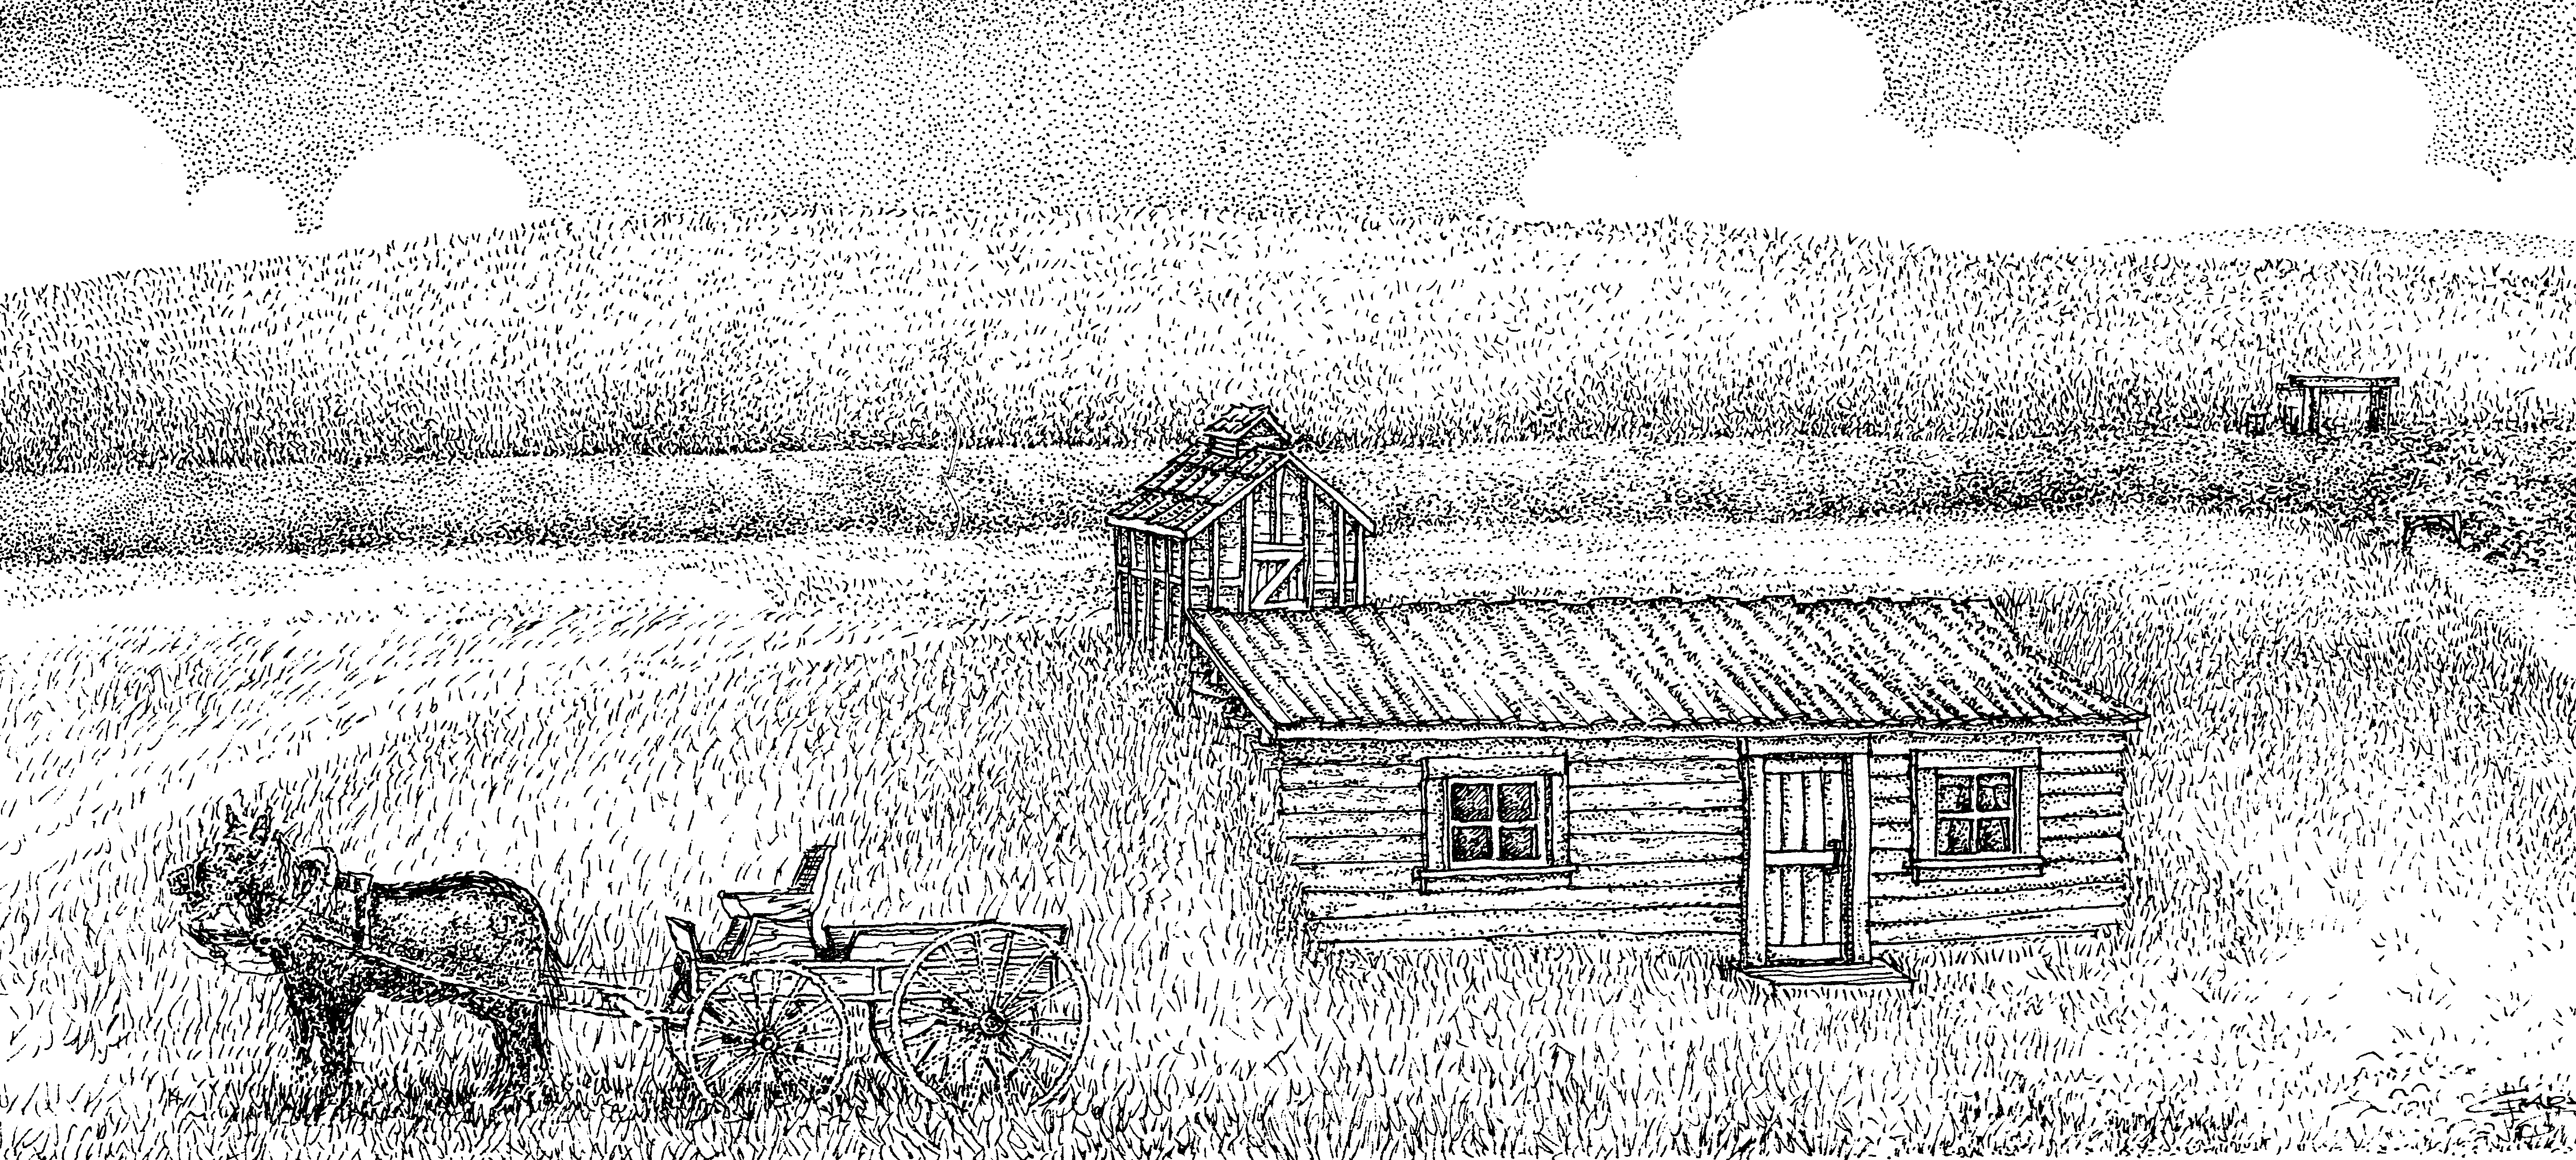 drawing of dugout home